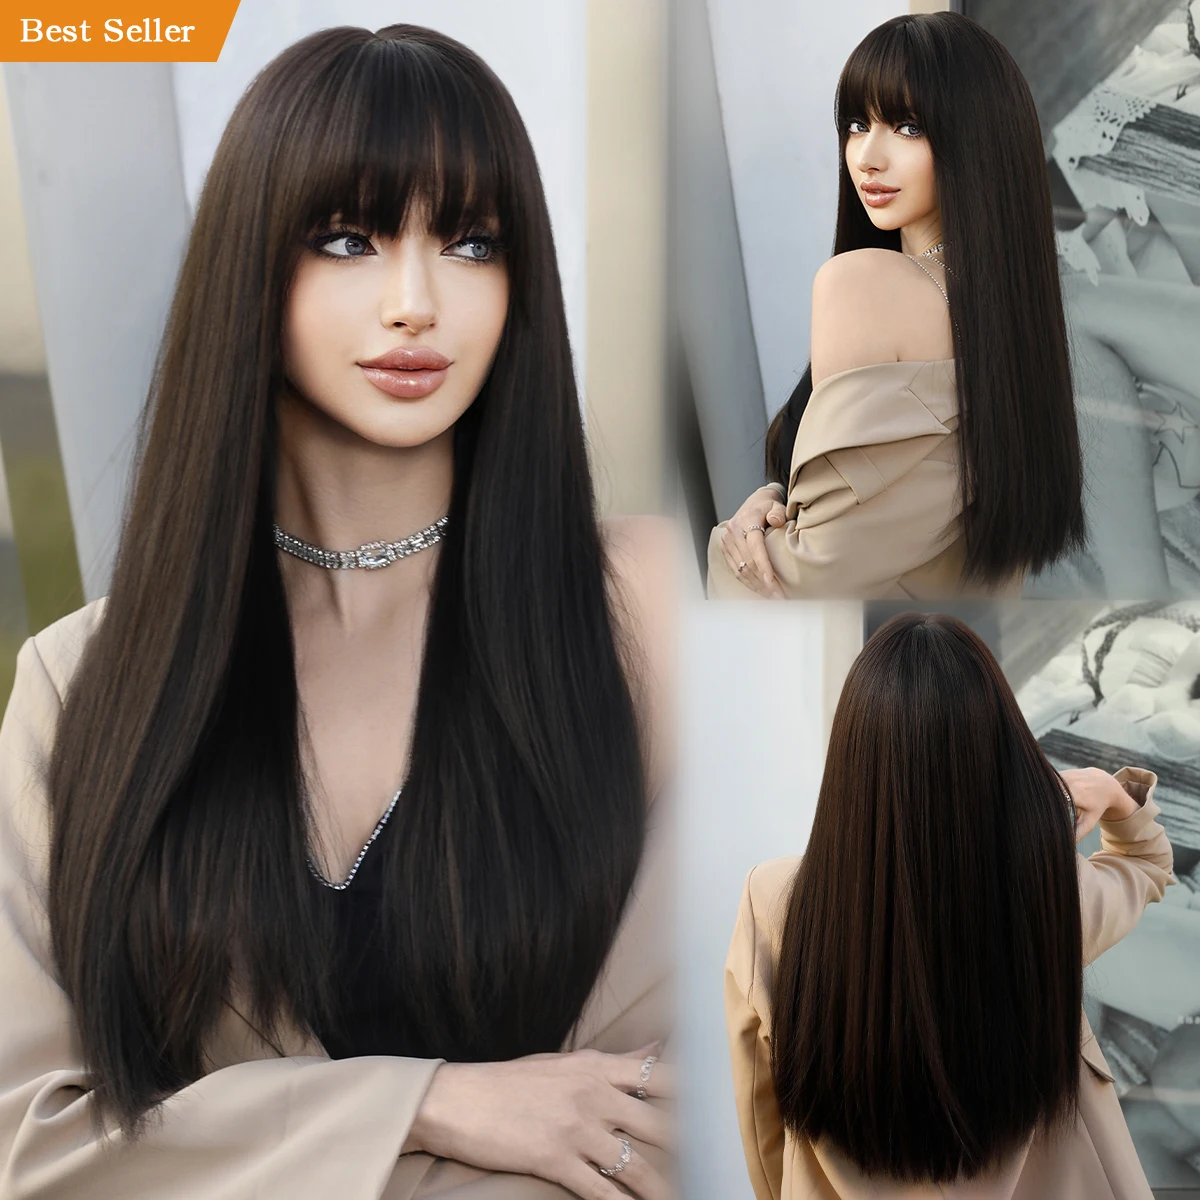 

Wholesale Wig Long Straight Perruques with Bangs Blonde Black Pink Red Blue Gray Synthetic Wig for Anime Cosplay Pelucas Perucas